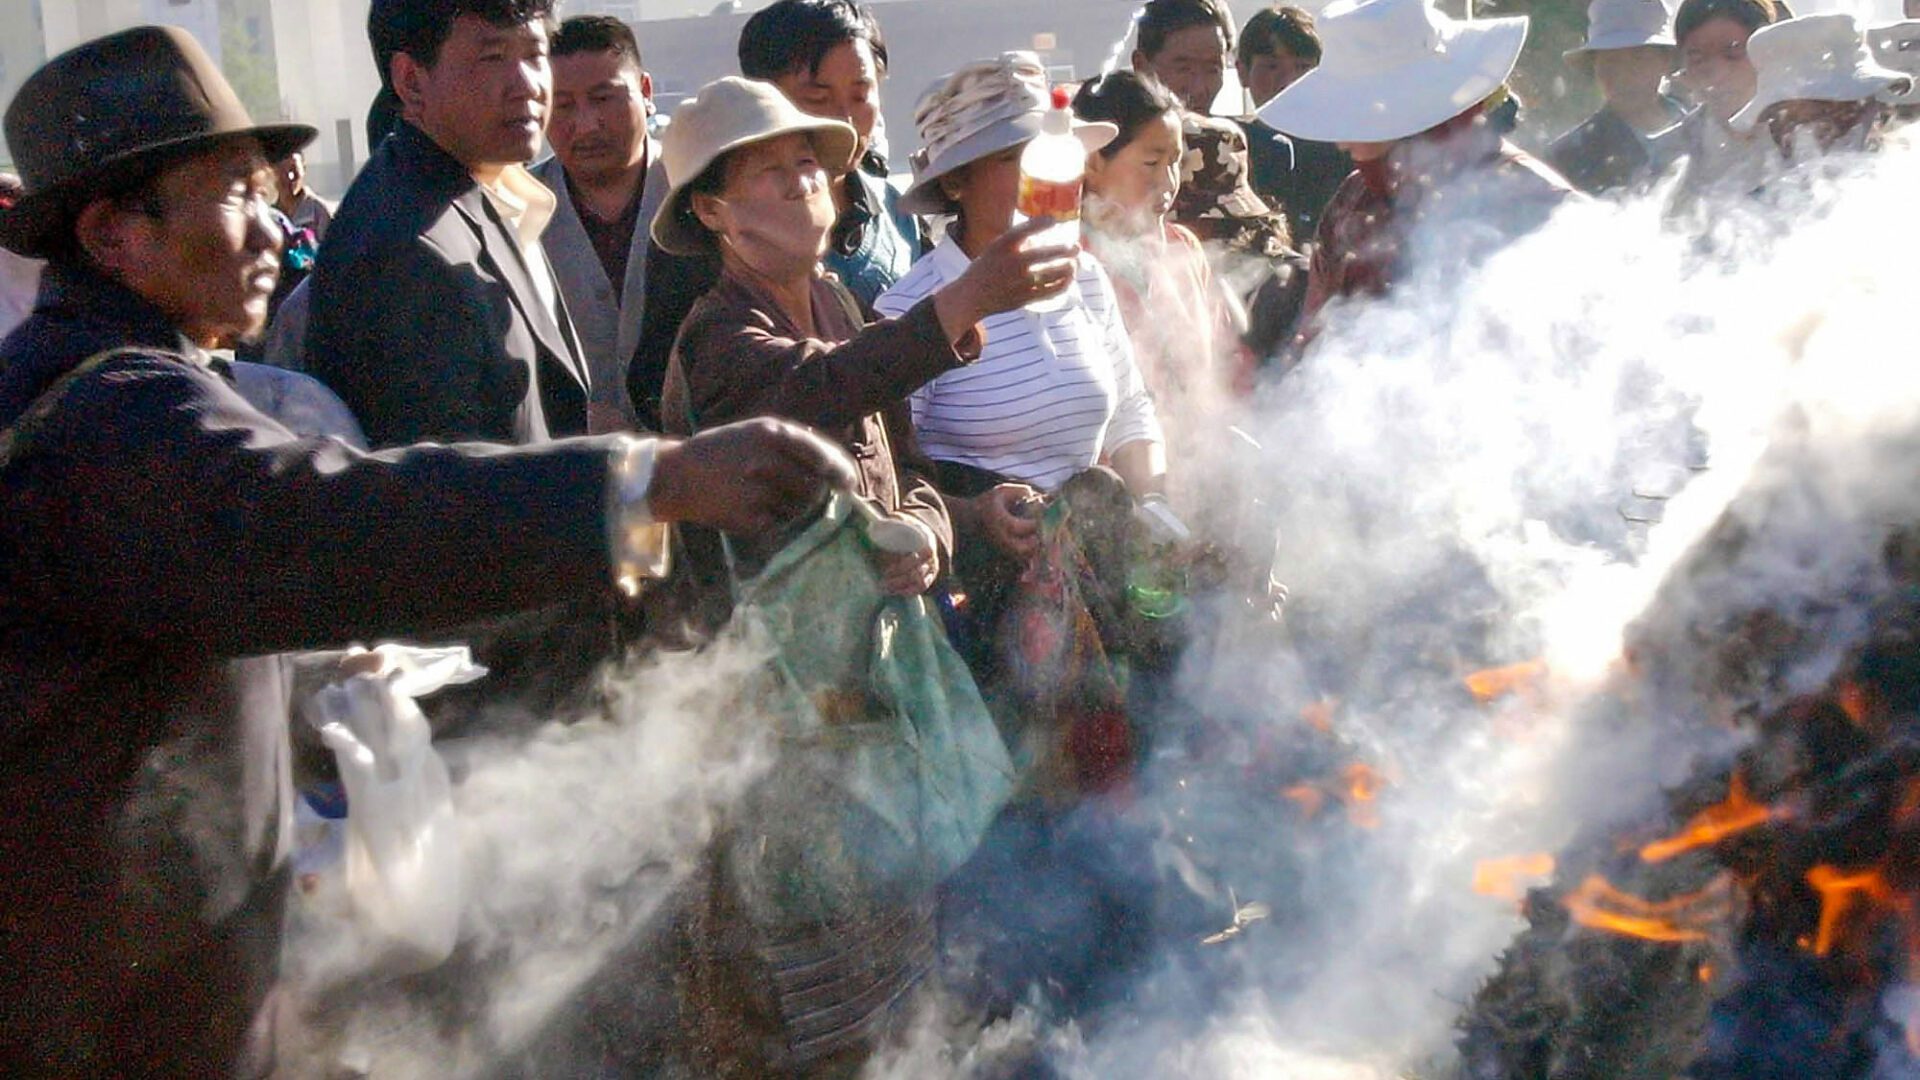 Tibetans burning juniper, an activity that has faced tight restrictions in recent years